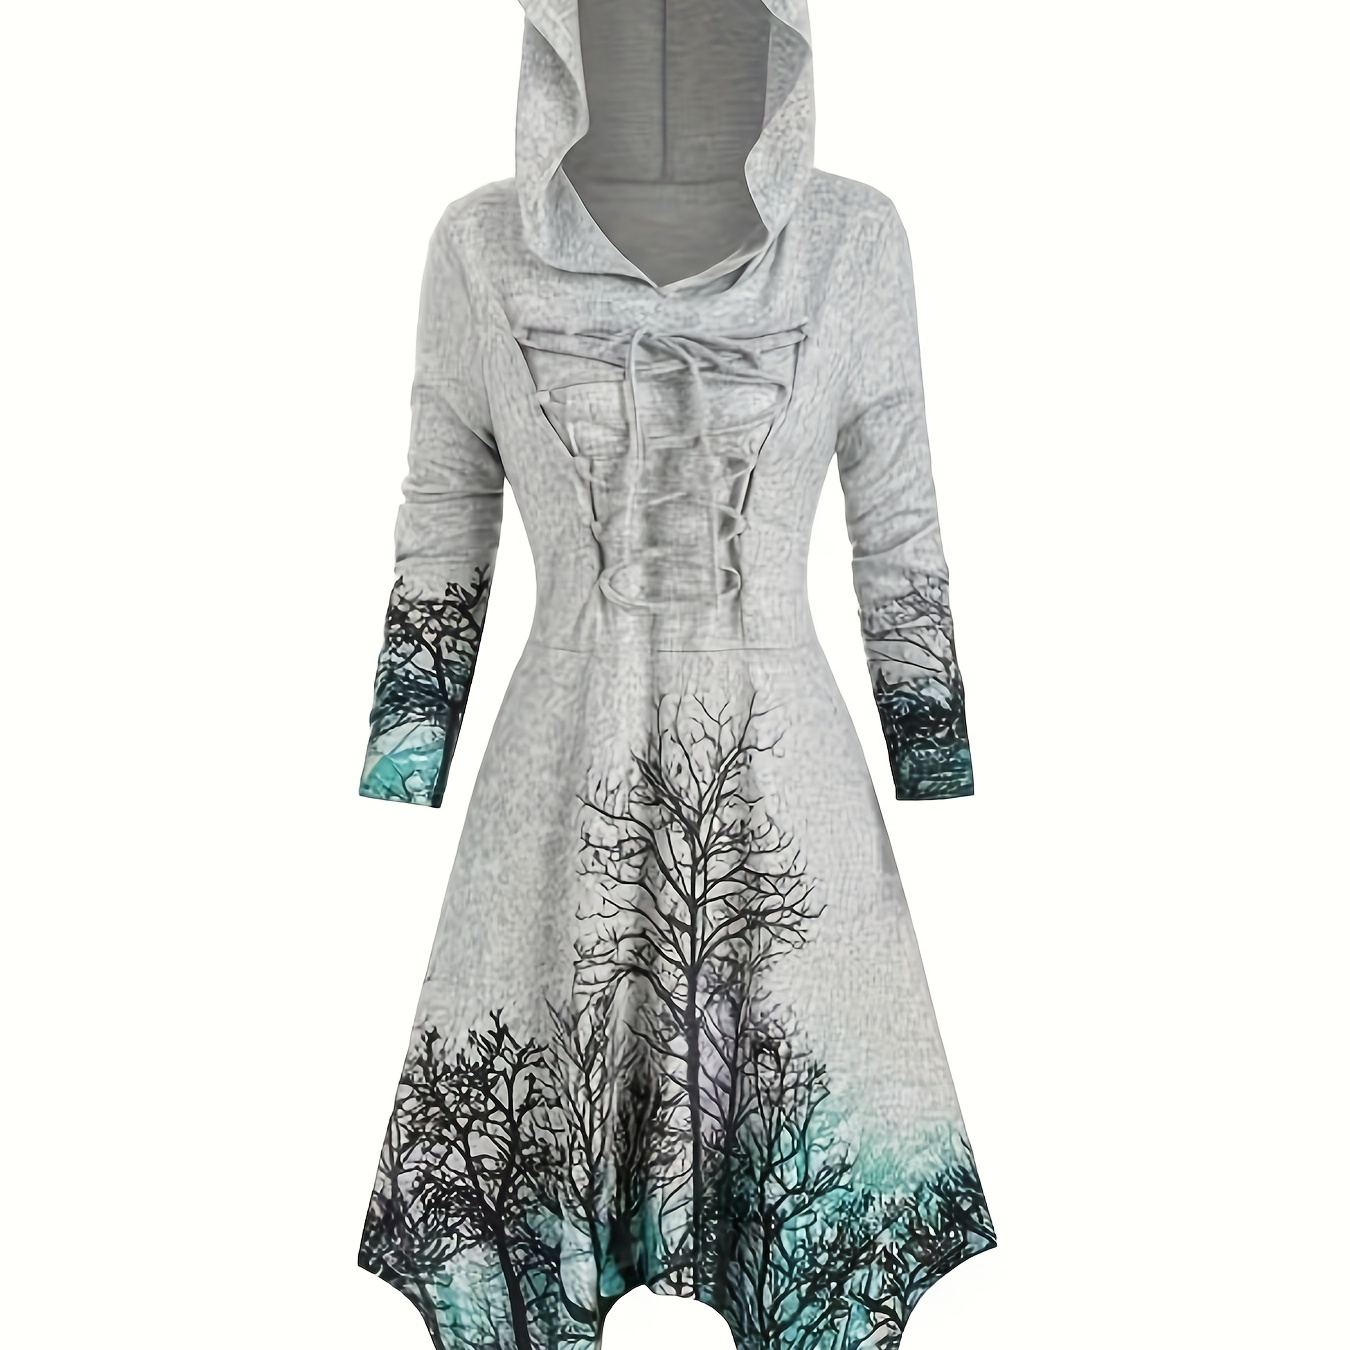 

Gothic Graphic Print Drawstring Hooded Dress, Casual Long Sleeve Dress For Spring & Fall, Women's Clothing